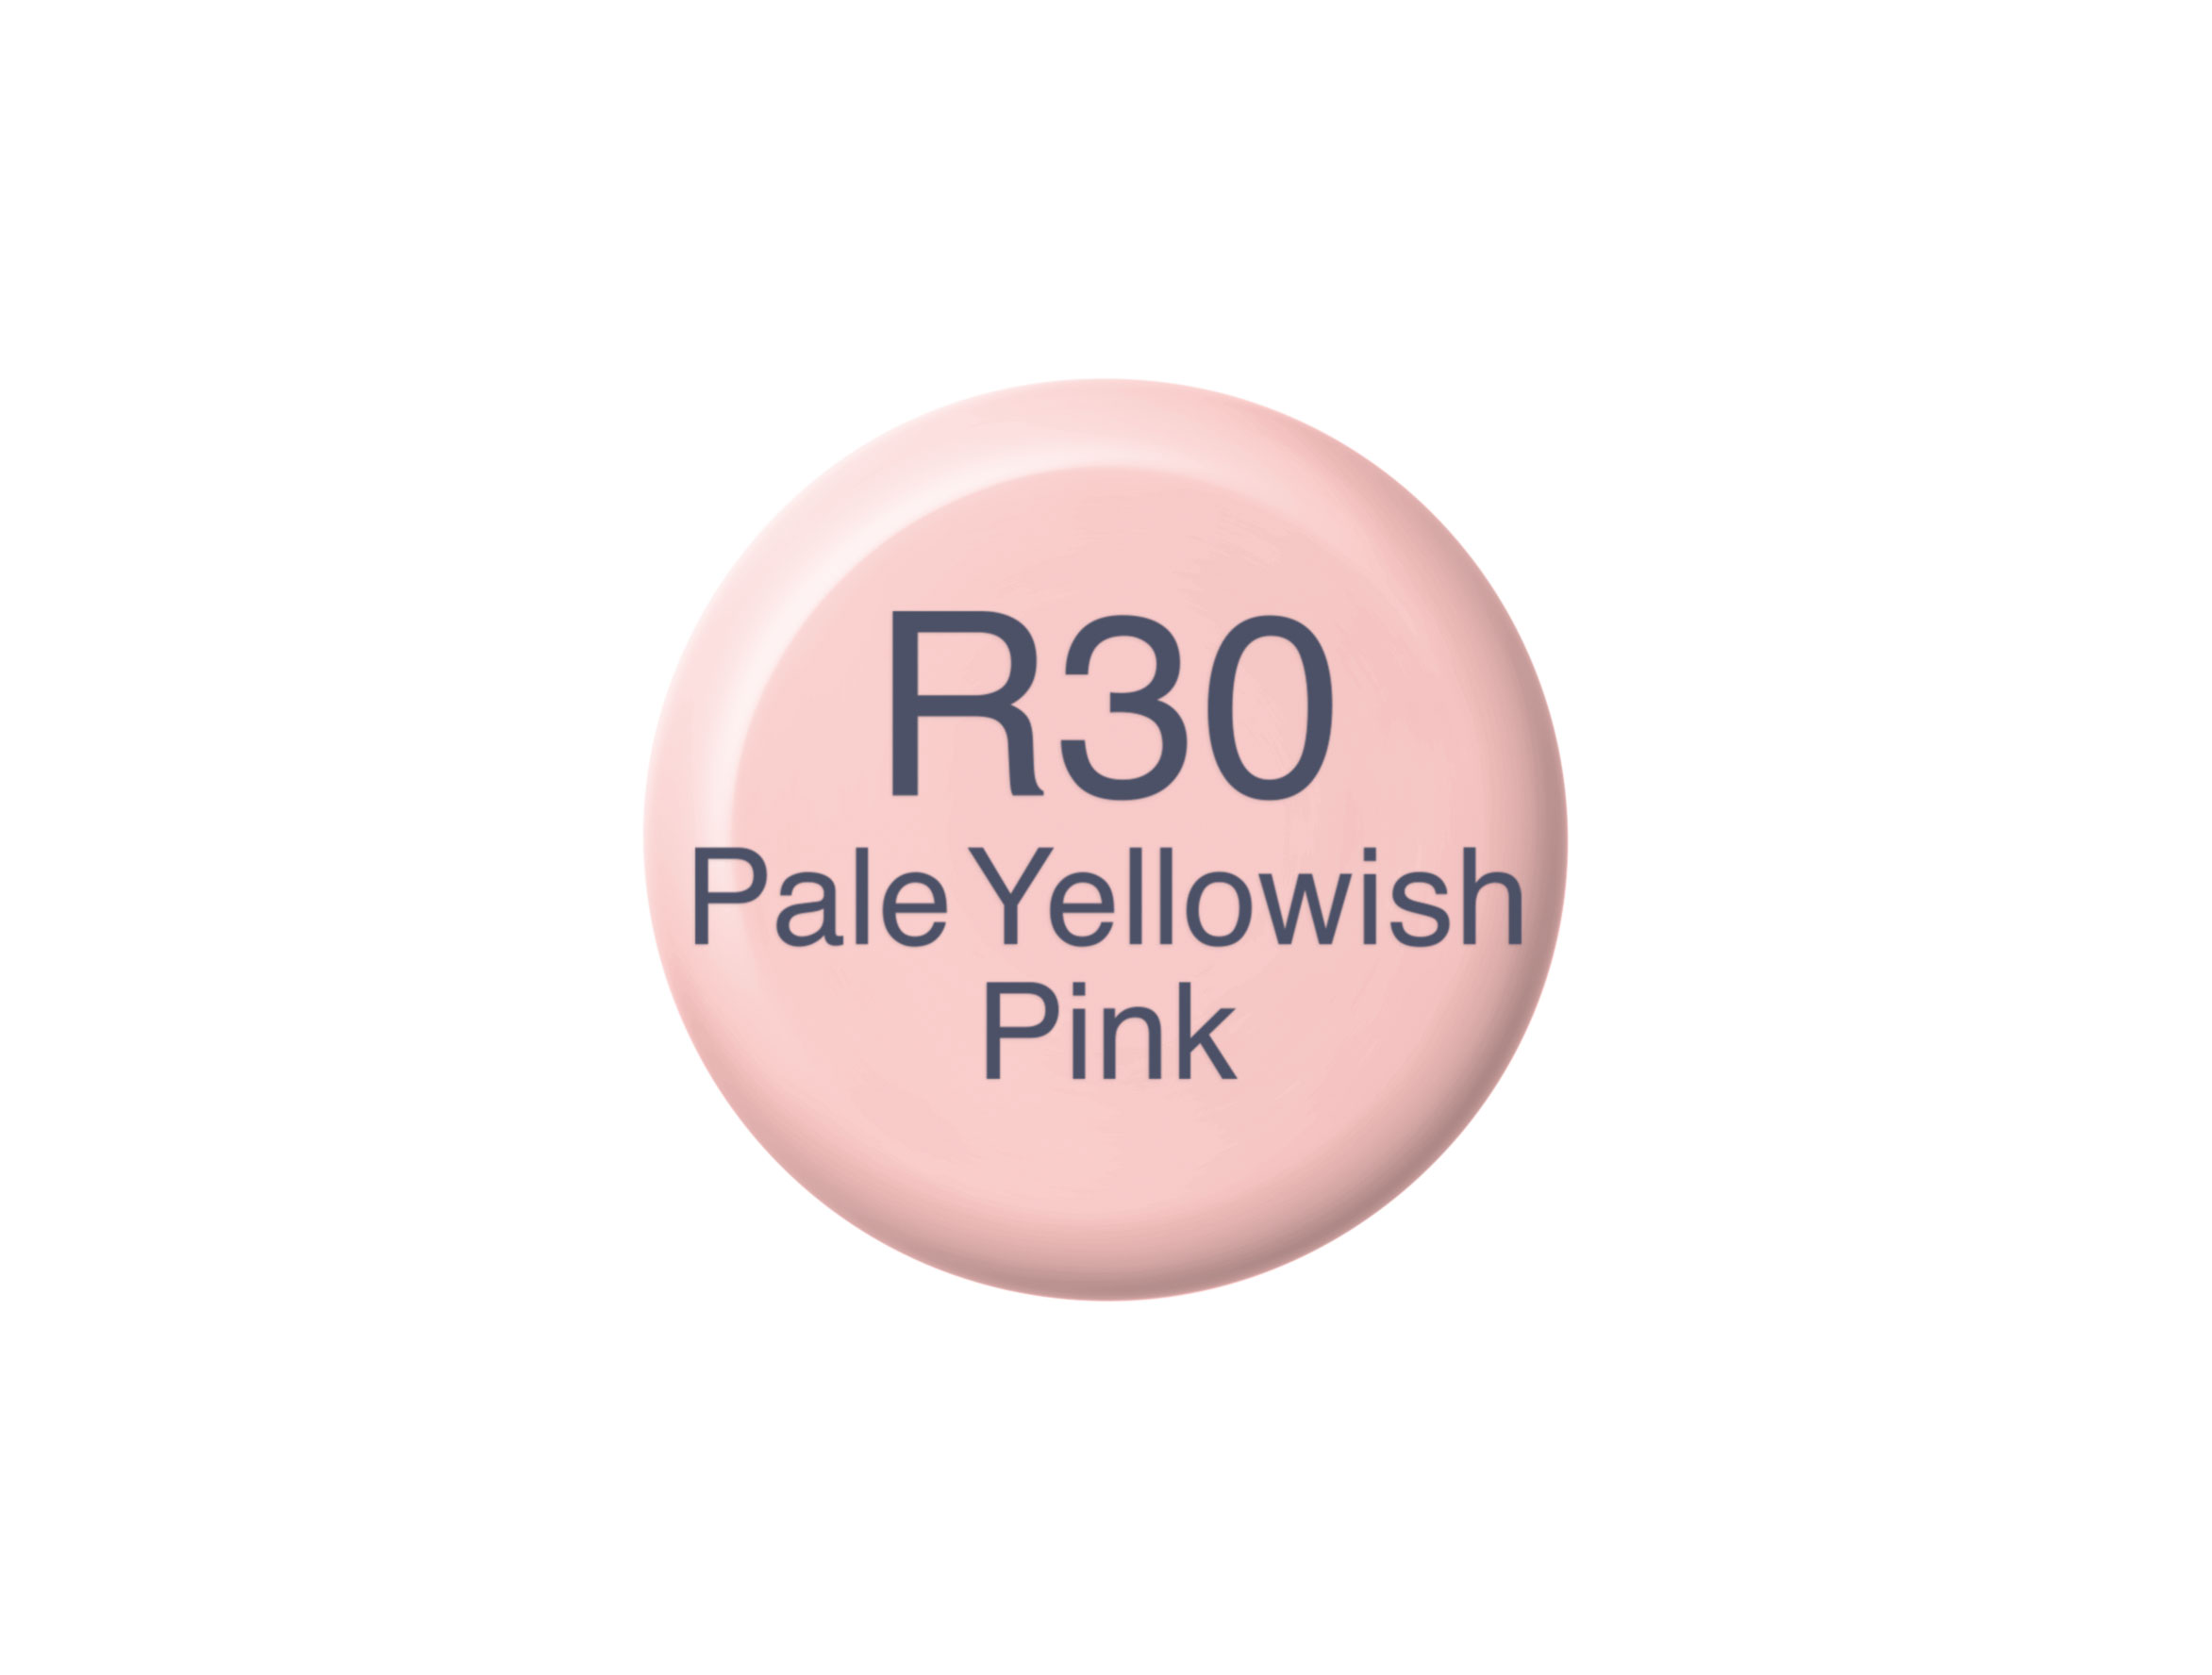 Copic Ink R30 Pale Yellowish Pink